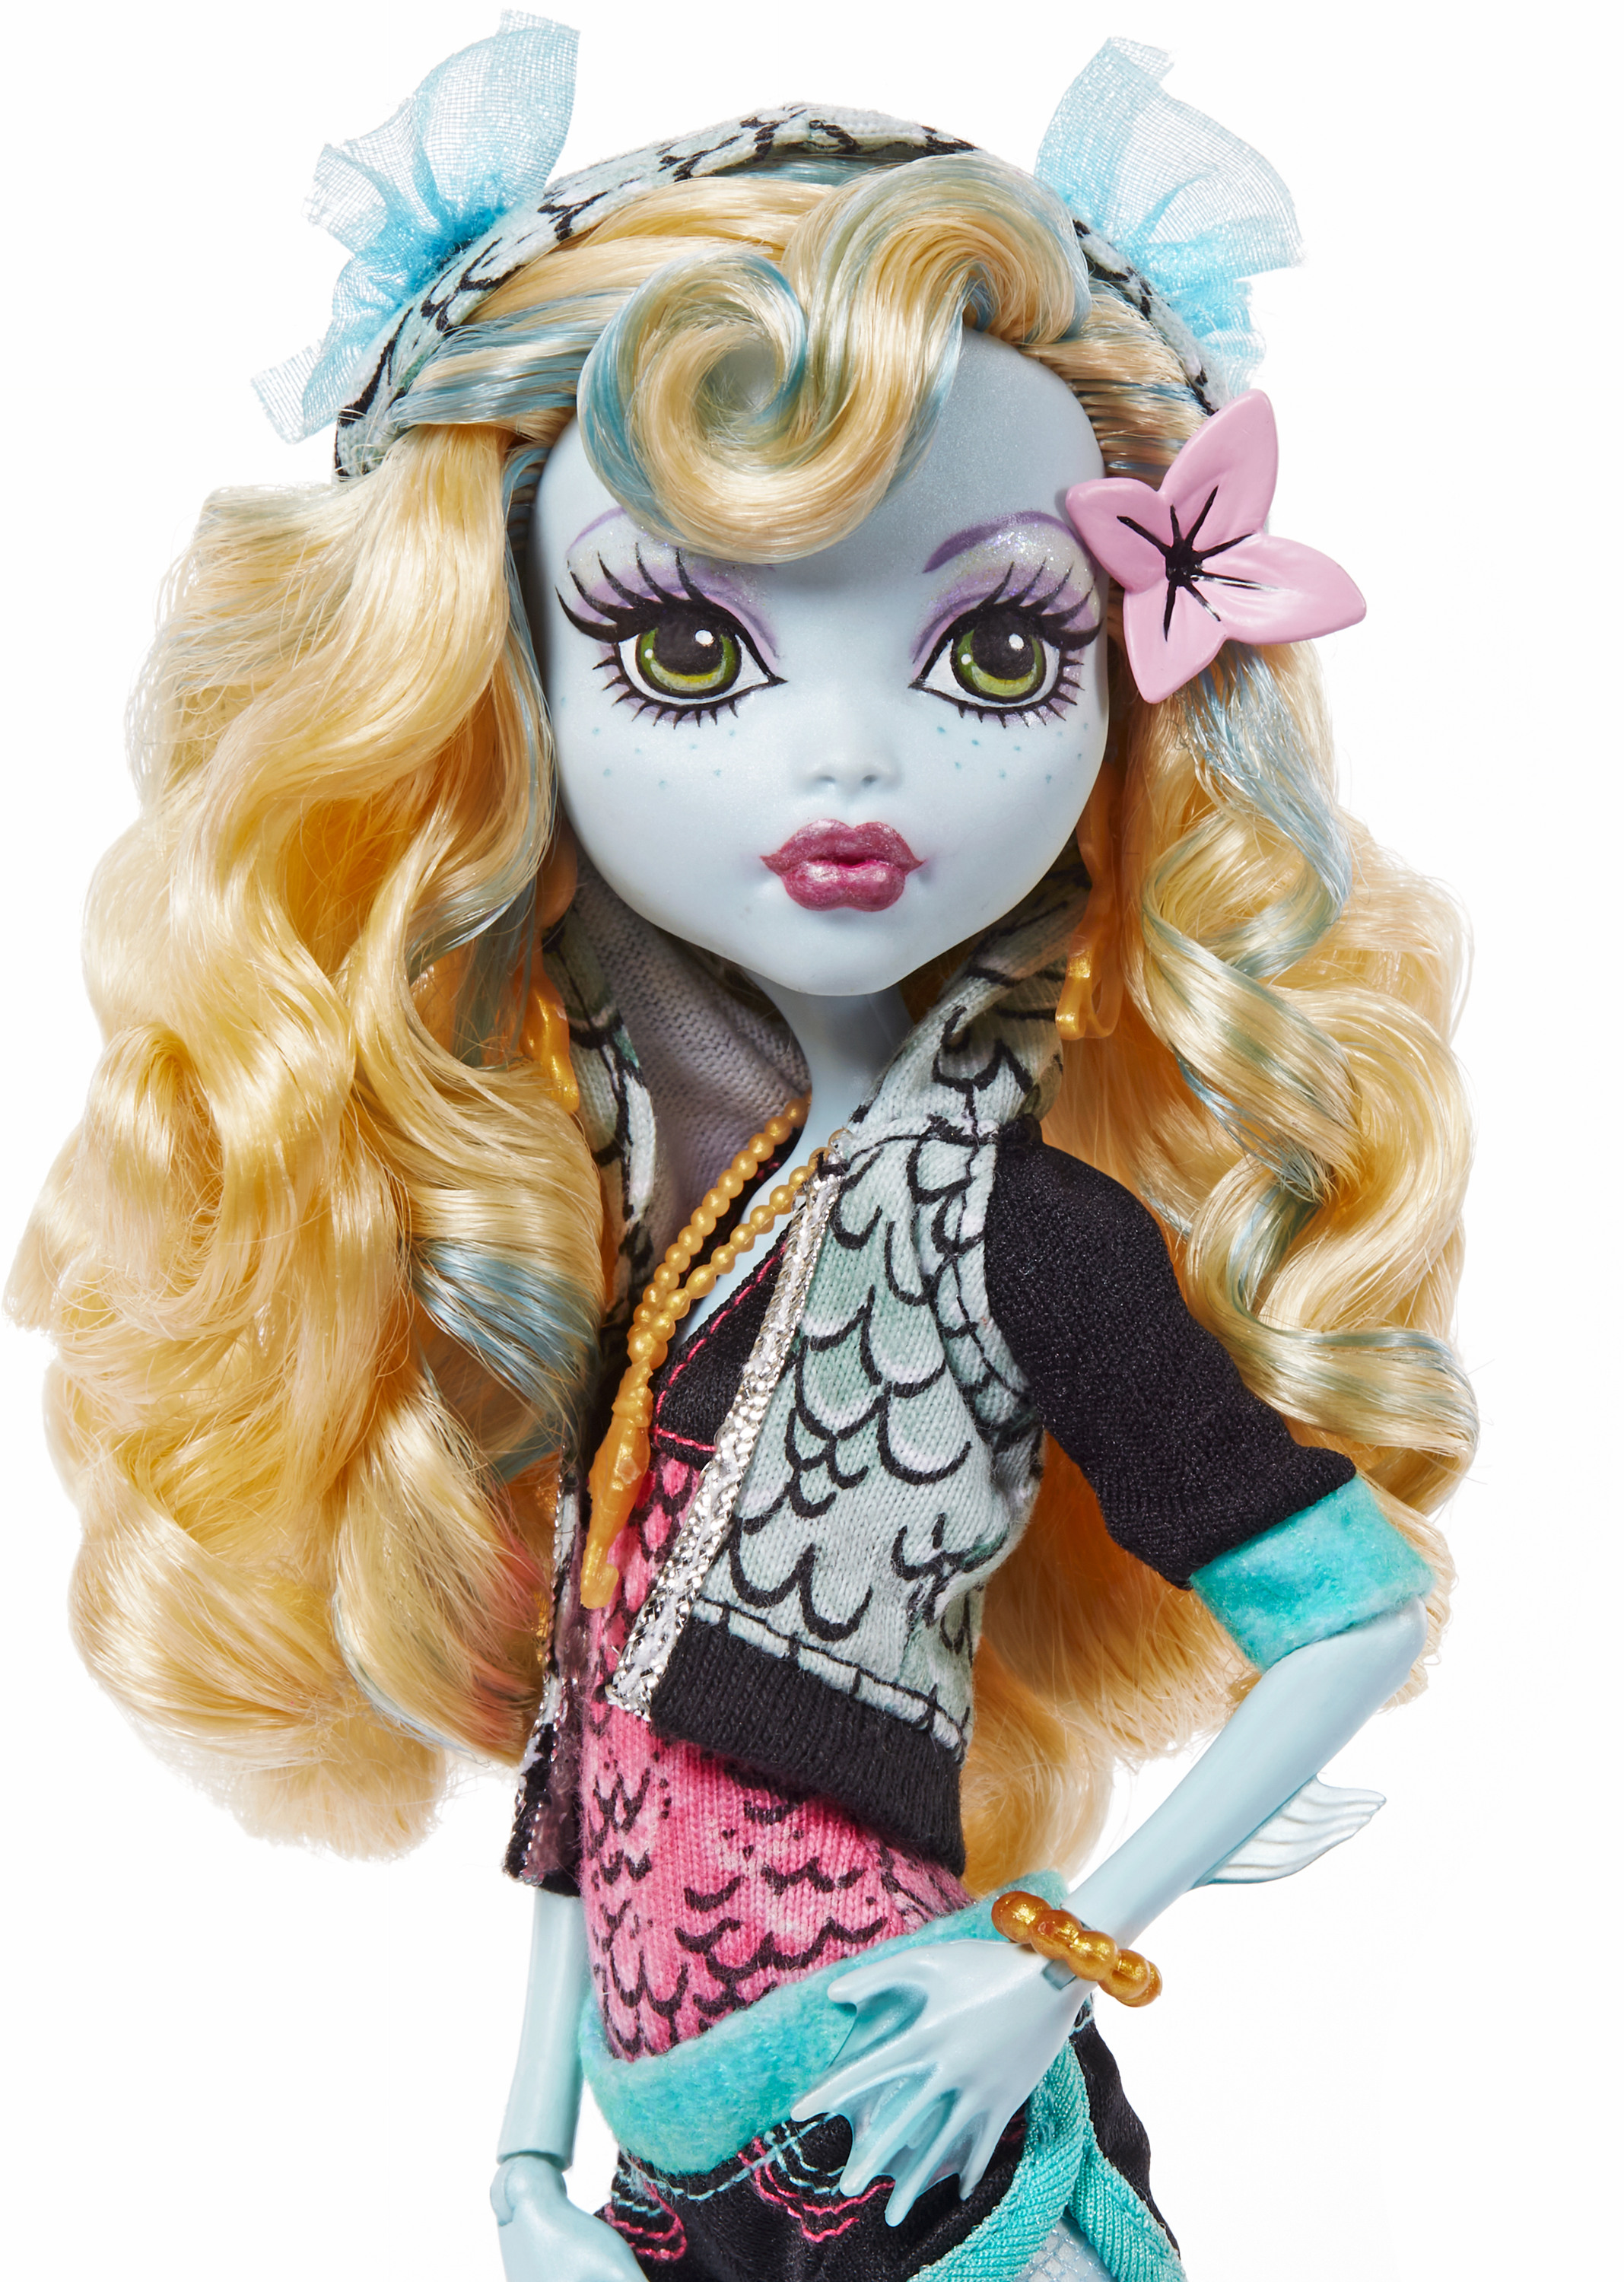 Monster High Lagoona Blue Doll, Collectible Reproduction in Original Look with Diary & Doll Stand - image 3 of 6